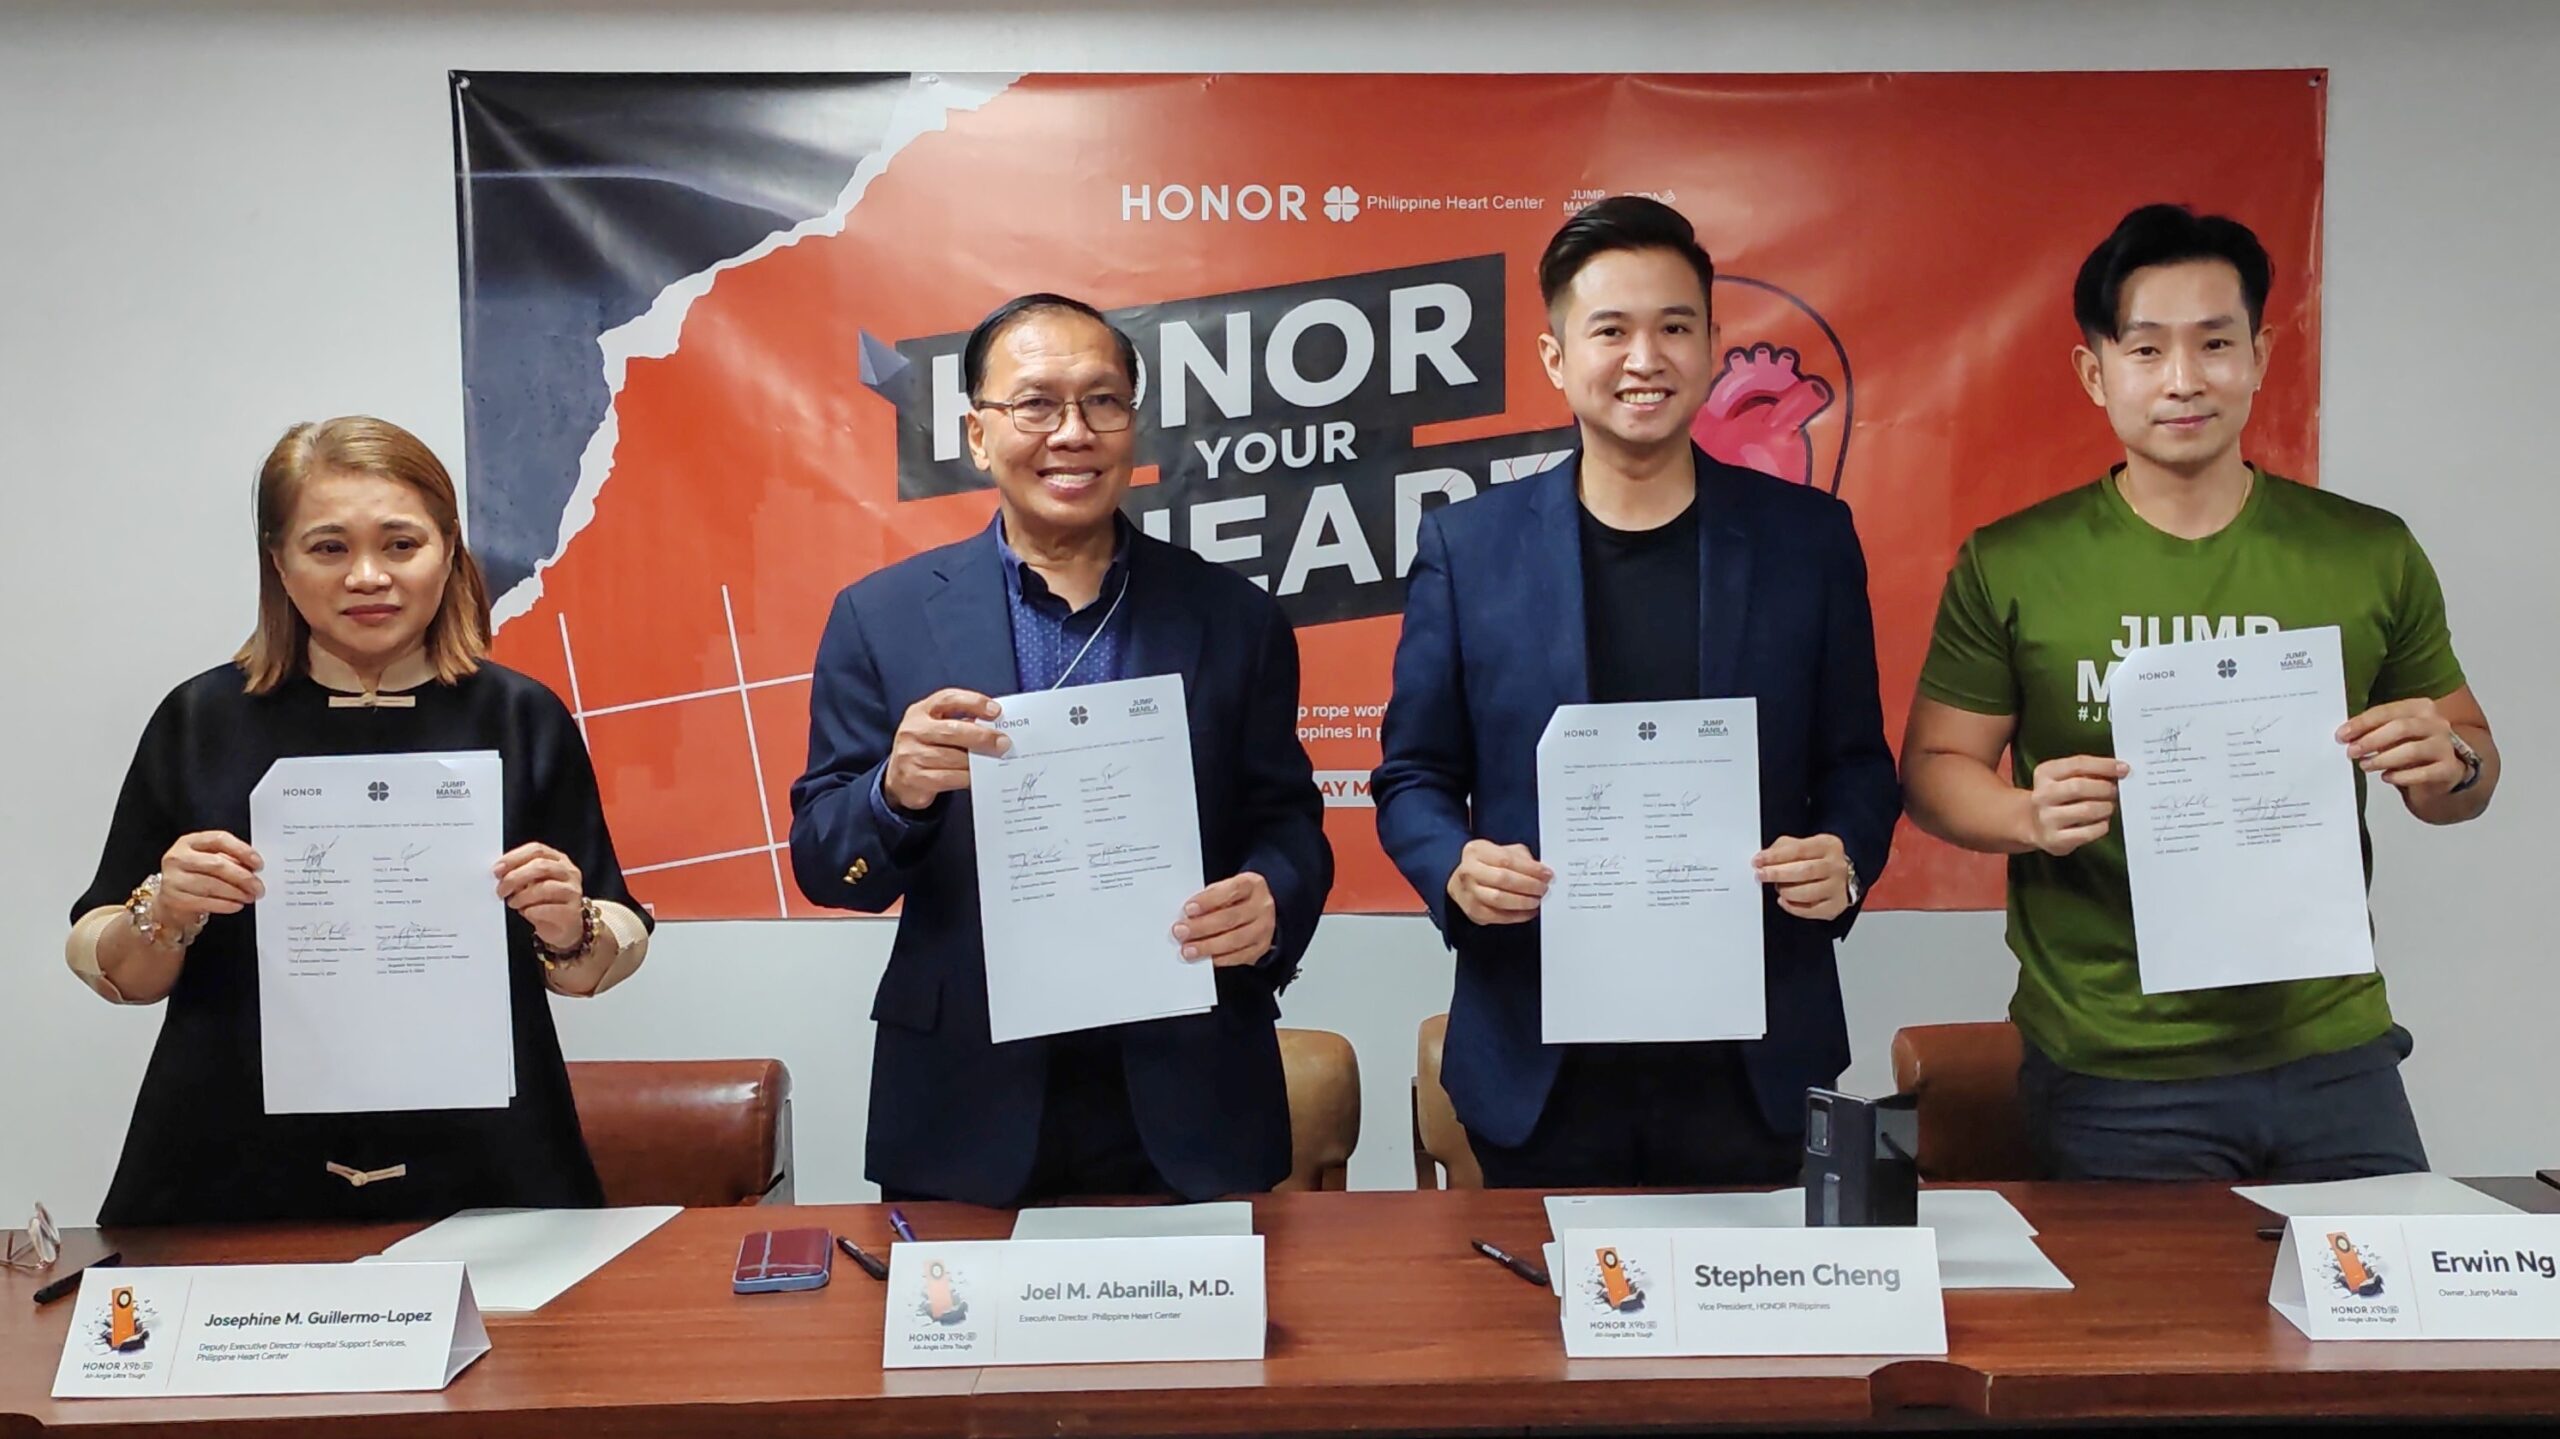 Philippine Heart Center executives Ms. Josephine M. Guillermo-Lopez and Dr. Joel M. Abanilla, with HONOR Vice President Stephen Cheng and Jump Manila's Founder and Owner Erwin Ng, sealed the partnership at Philippine Heart Center's Medica Arts Building.